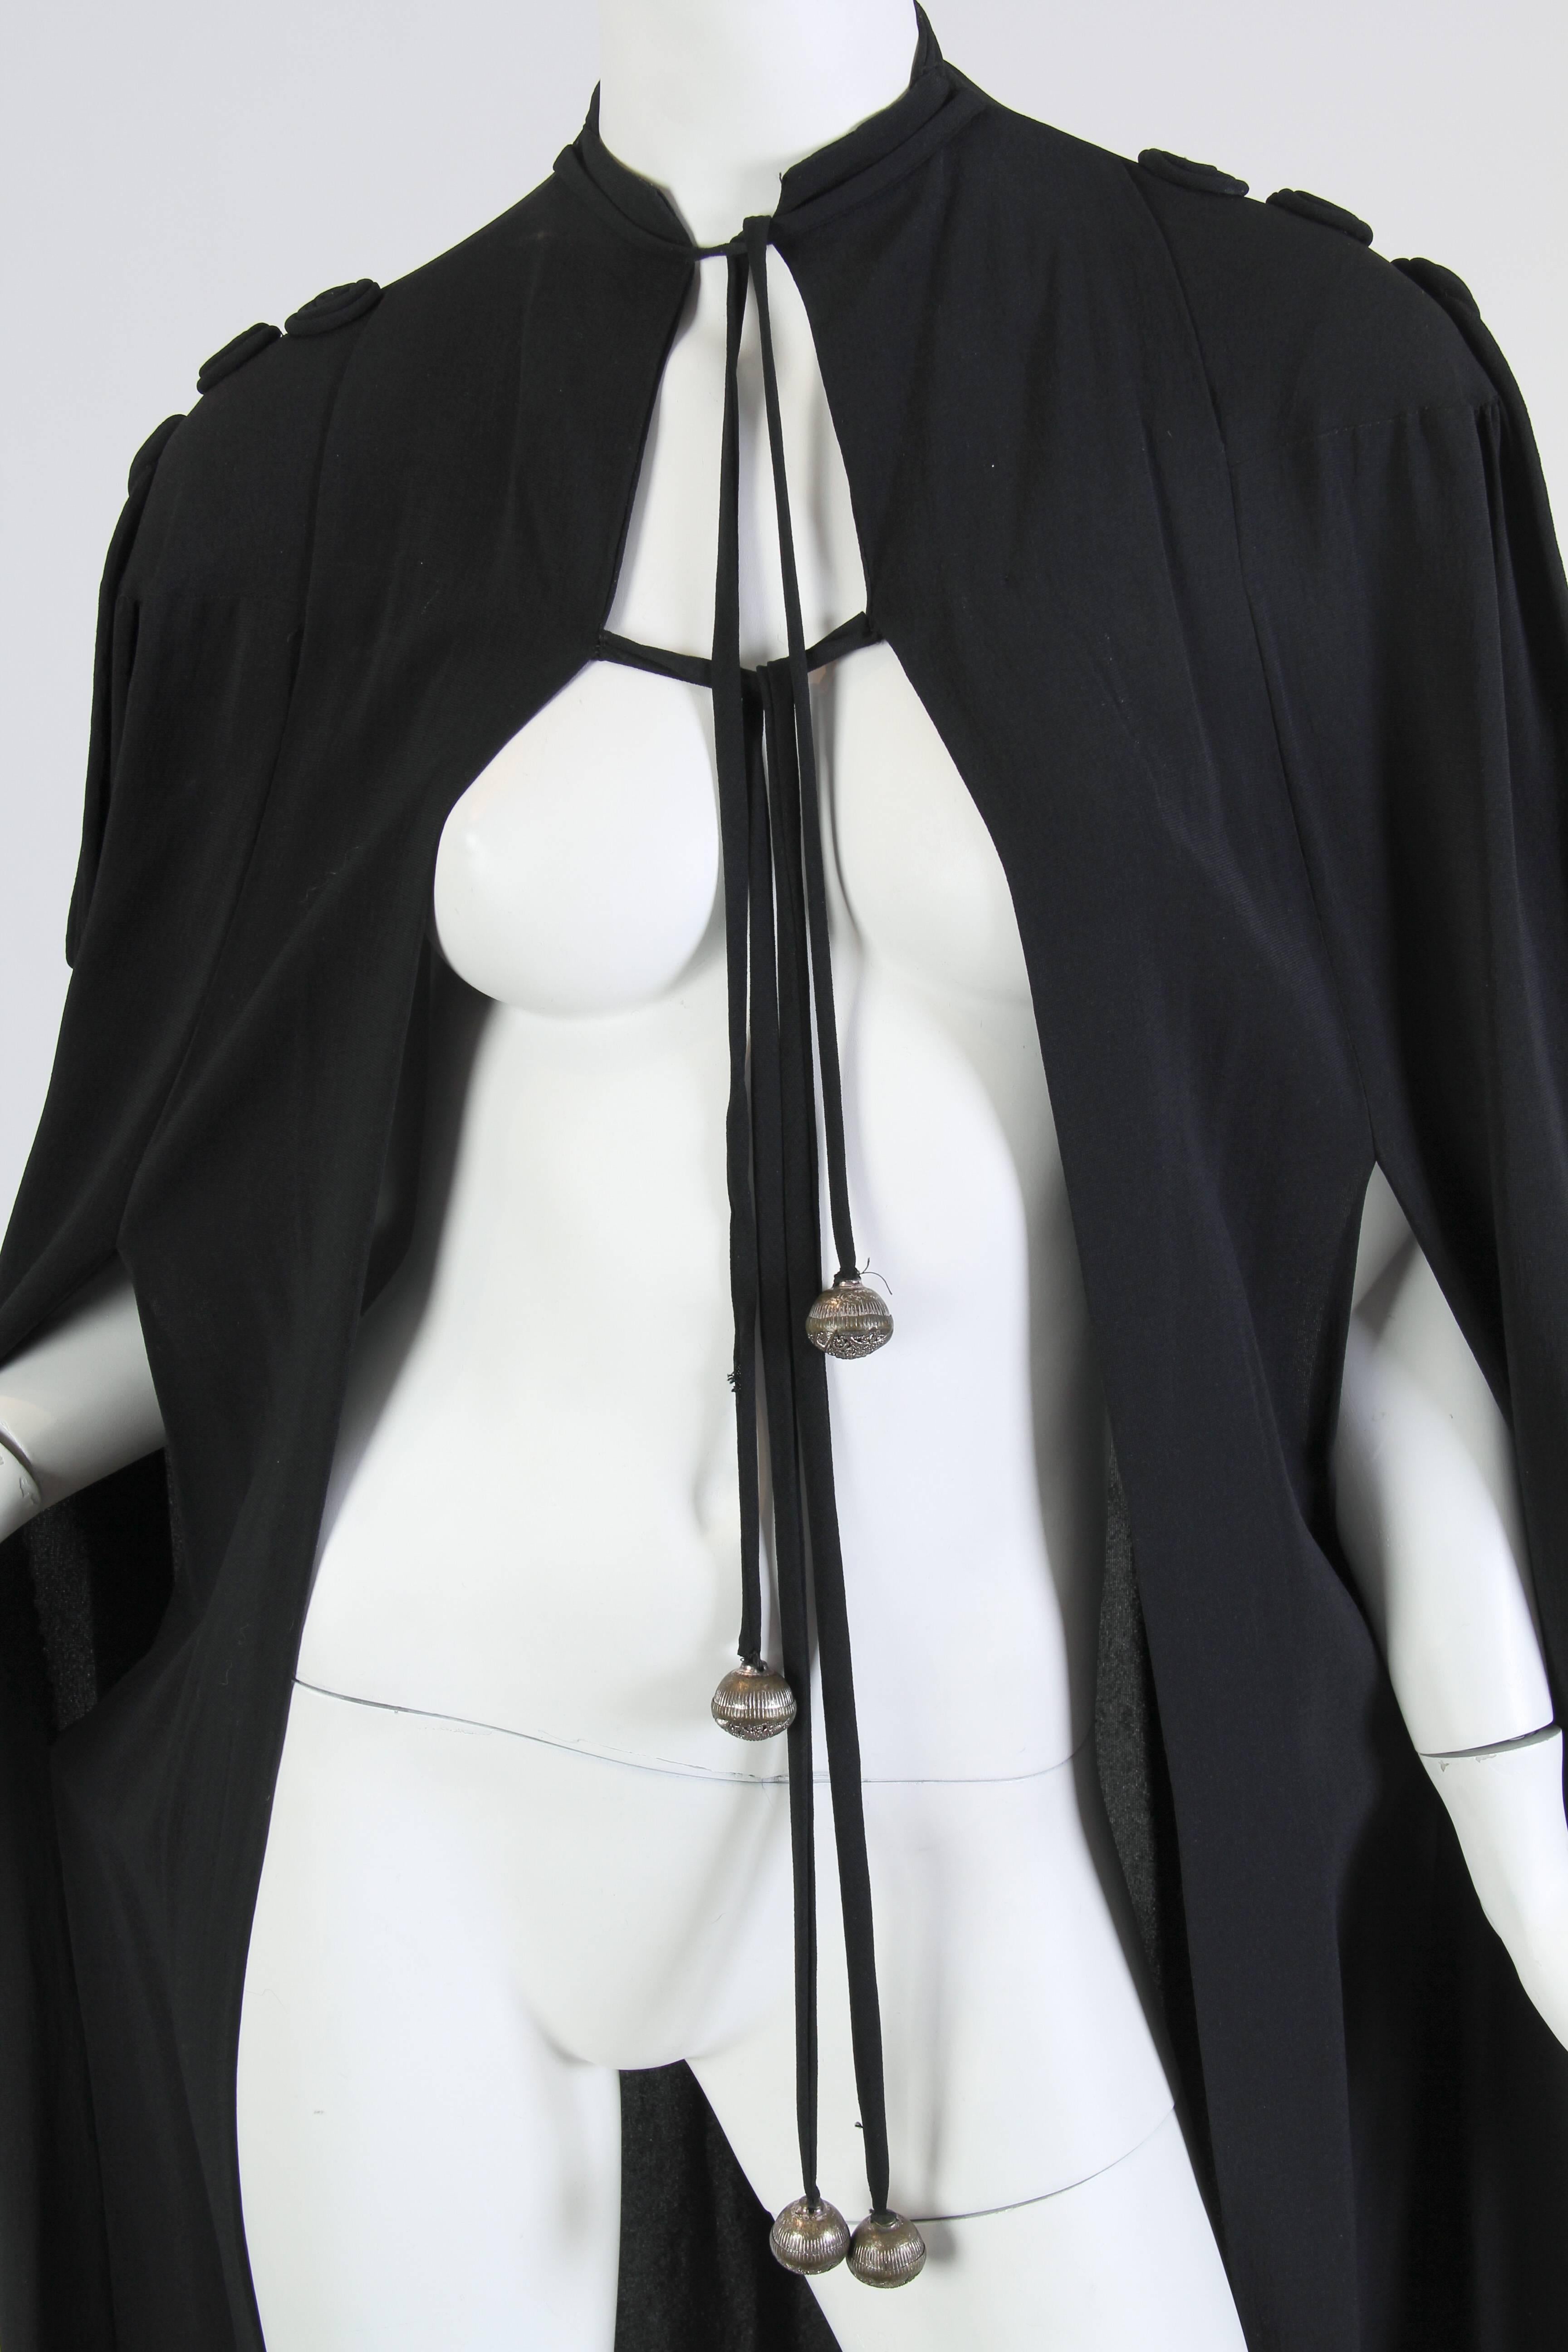 Women's 1930S Black Rayon & Silk Crepe Cape With Cording Epaulets Silver Dangling Balls